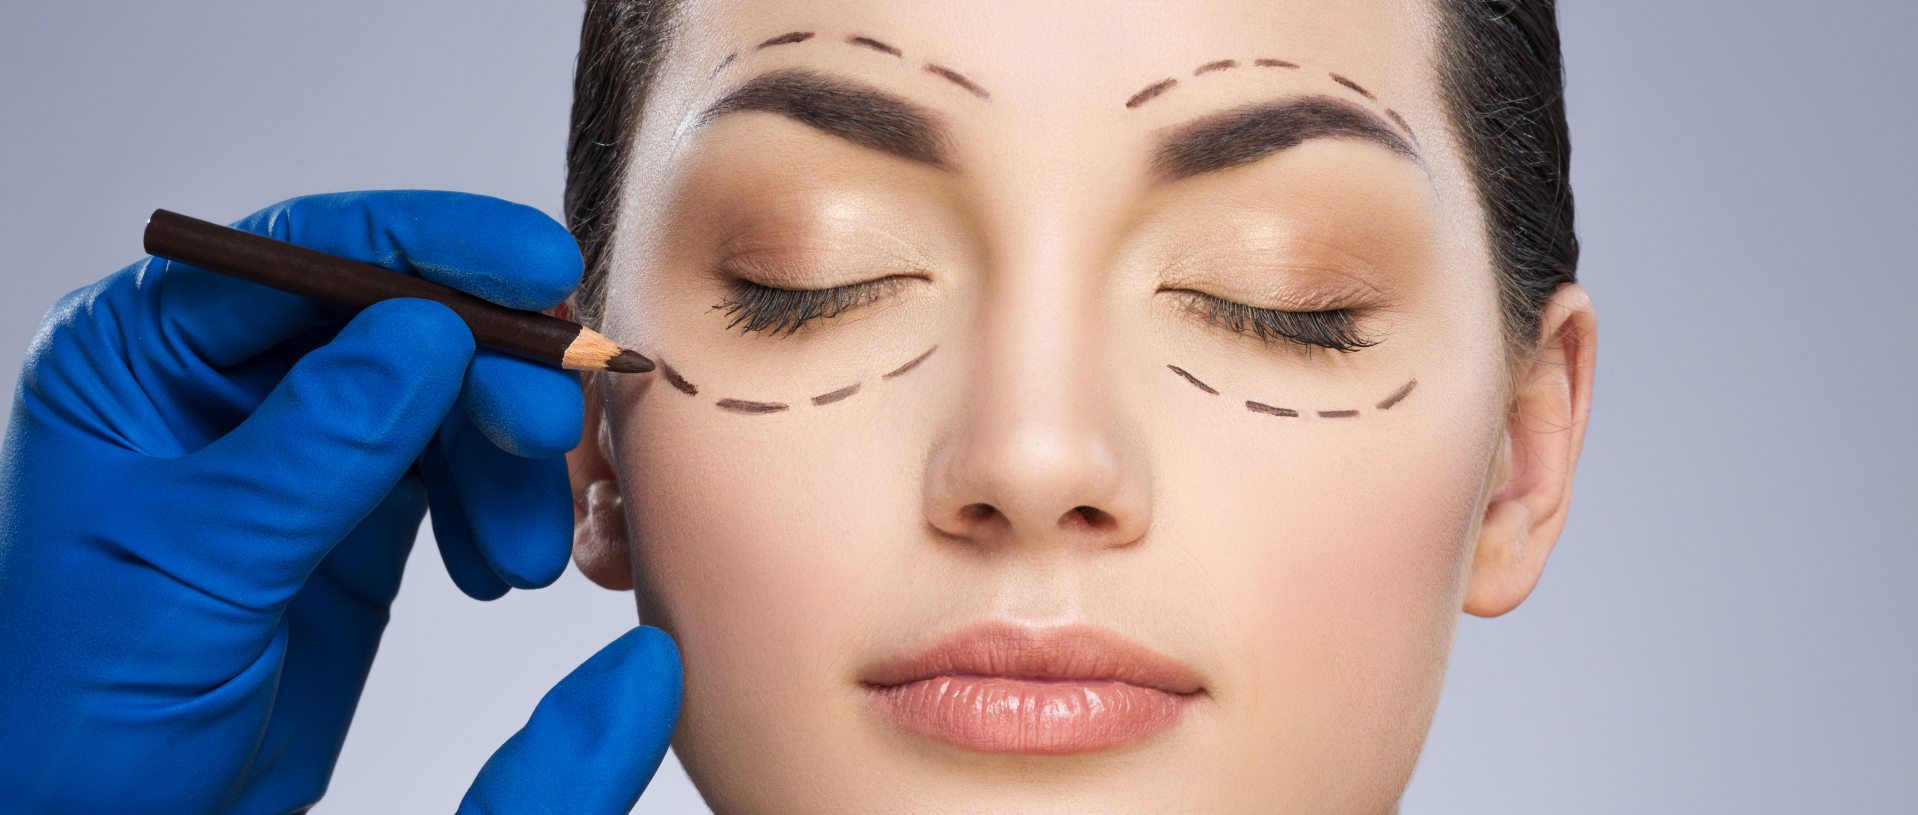 plastic surgeon drawing dashed lines around closed eyes of girl